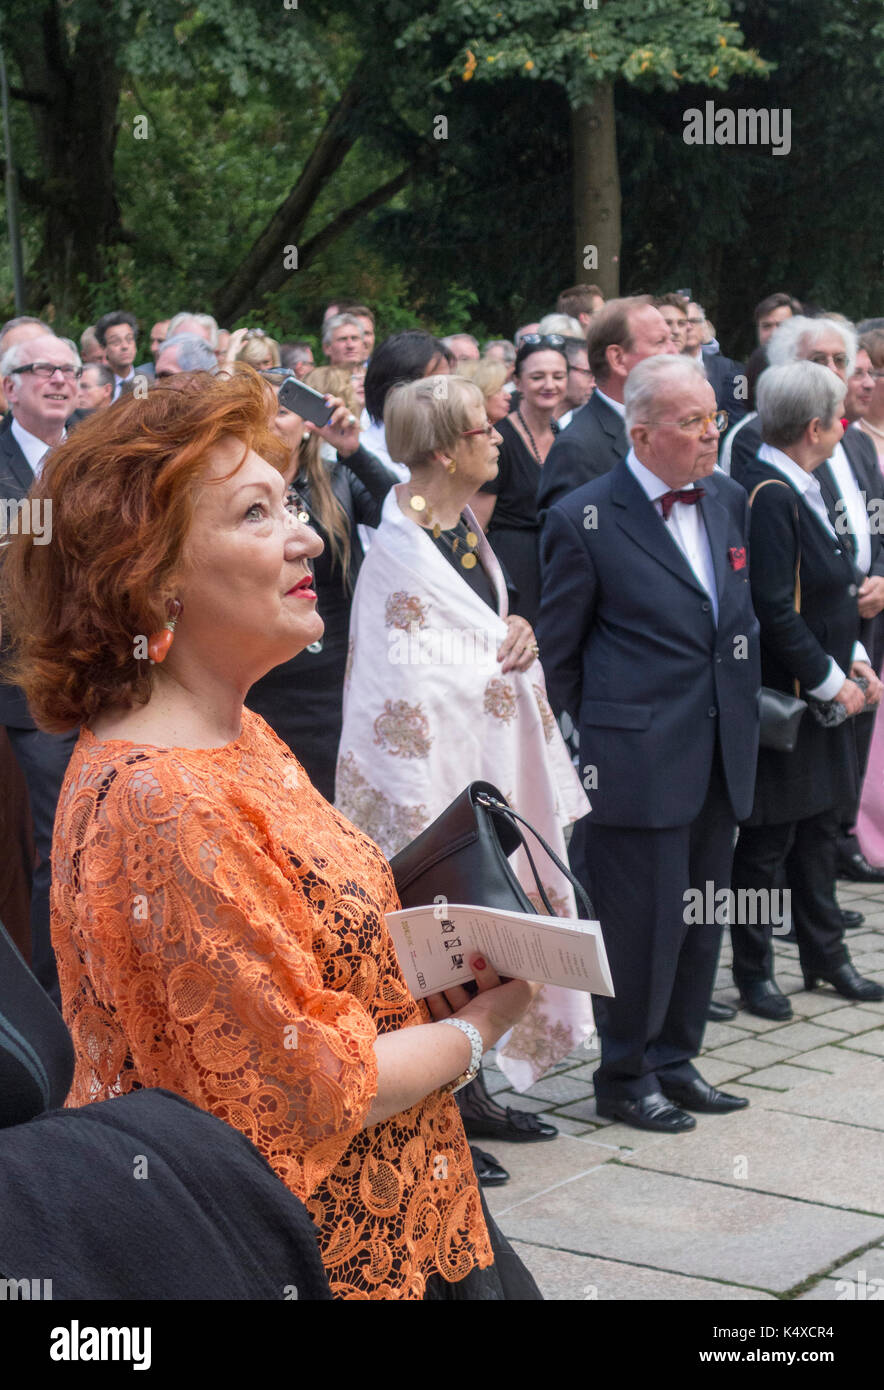 patrons waiting for brass fanfare, Bayreuth Opera Festival 2017, Bavaria, Germany Stock Photo